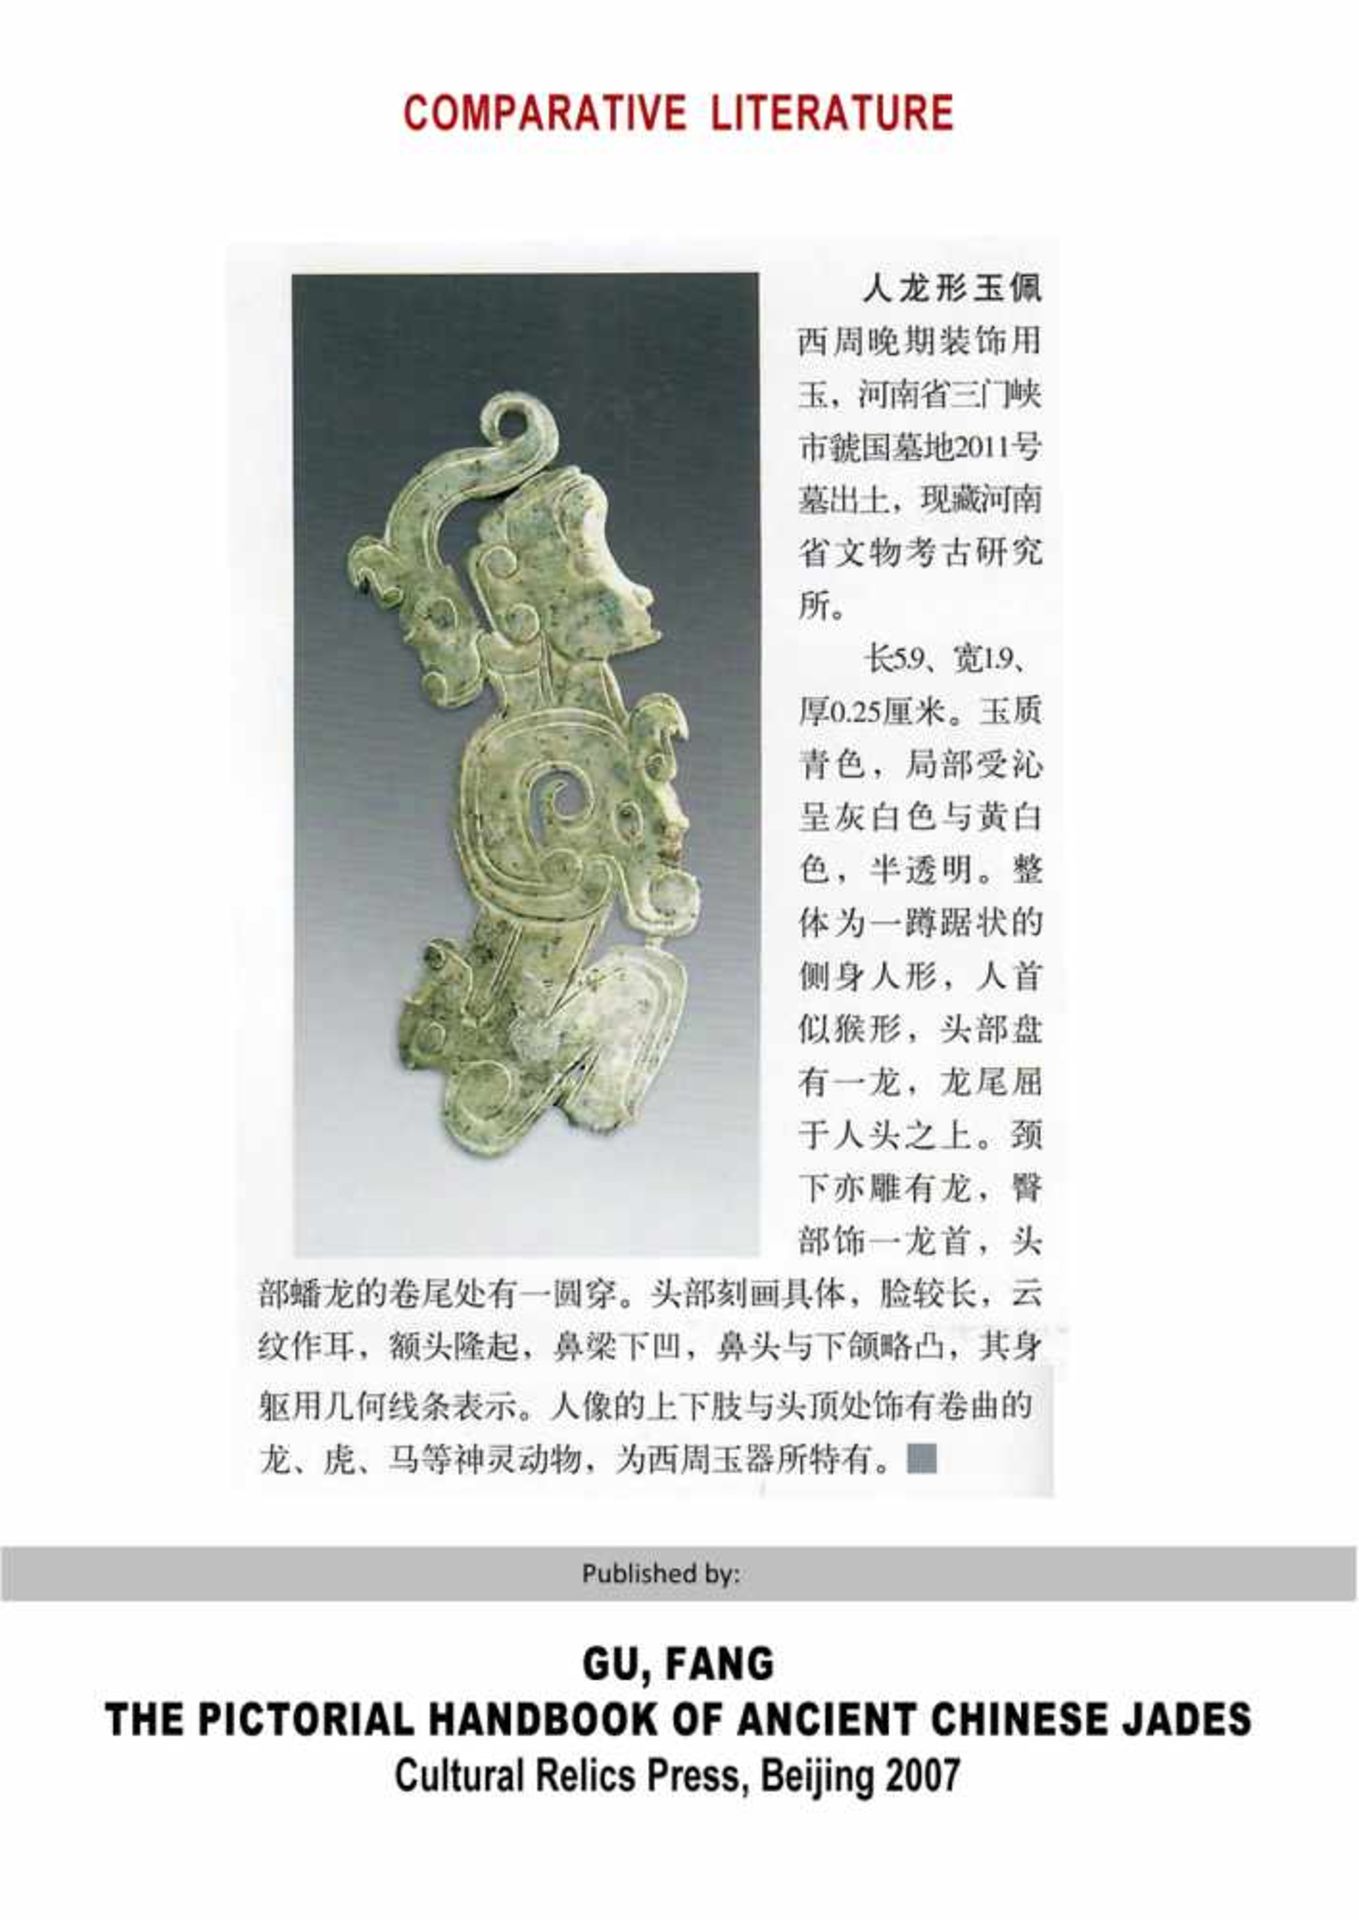 A THIN, FLAT ORNAMENT WITH A COMPOSITE PATTERN OF HUMAN HEADS AND DRAGONS Jade. China, Western Zhou, - Image 3 of 11